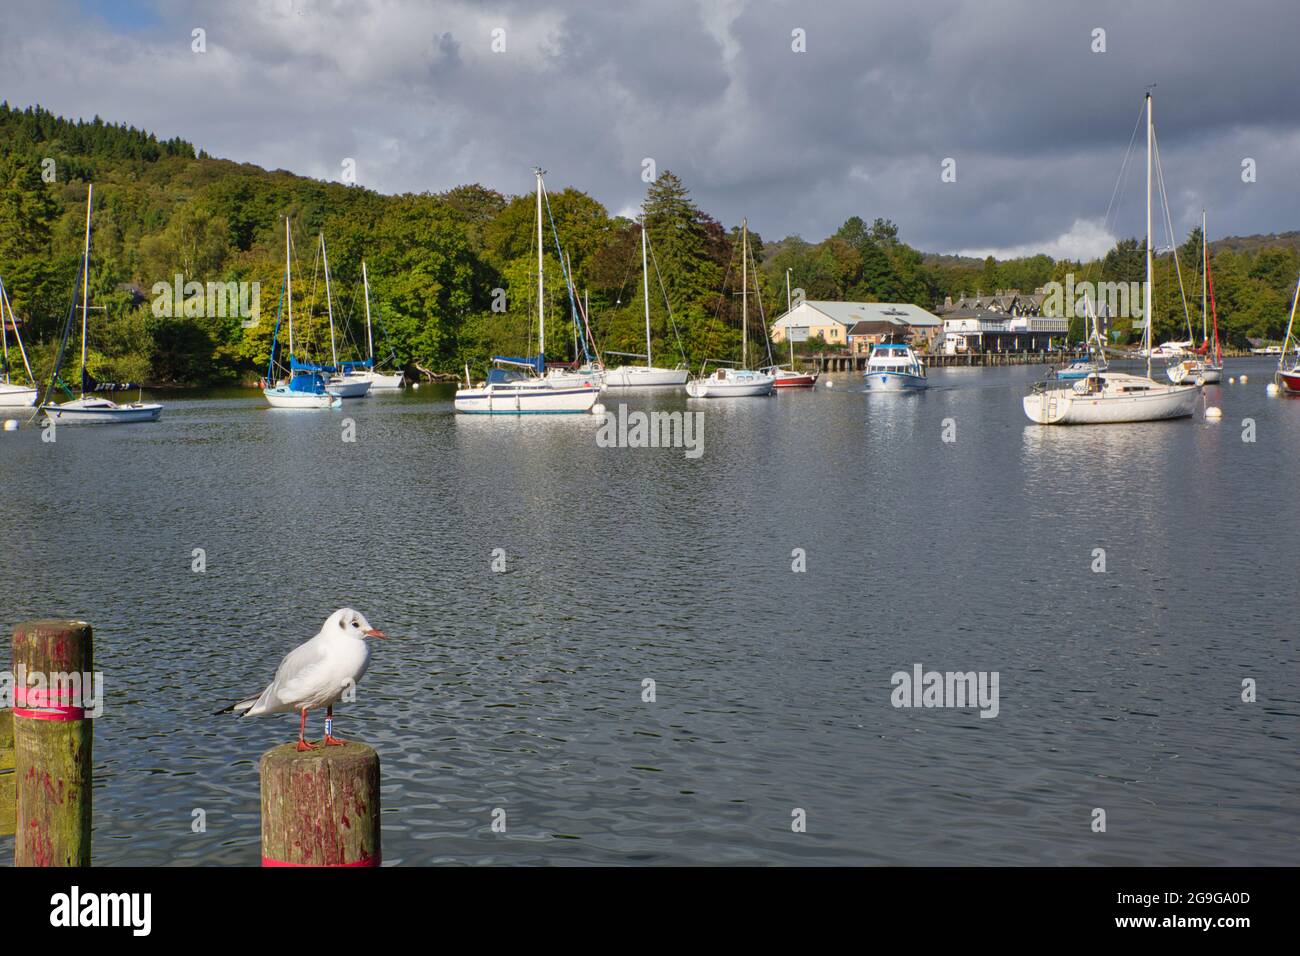 A lakeside scene with boats on their moorings in the Lake District, Cumbria, England, UK Stock Photo